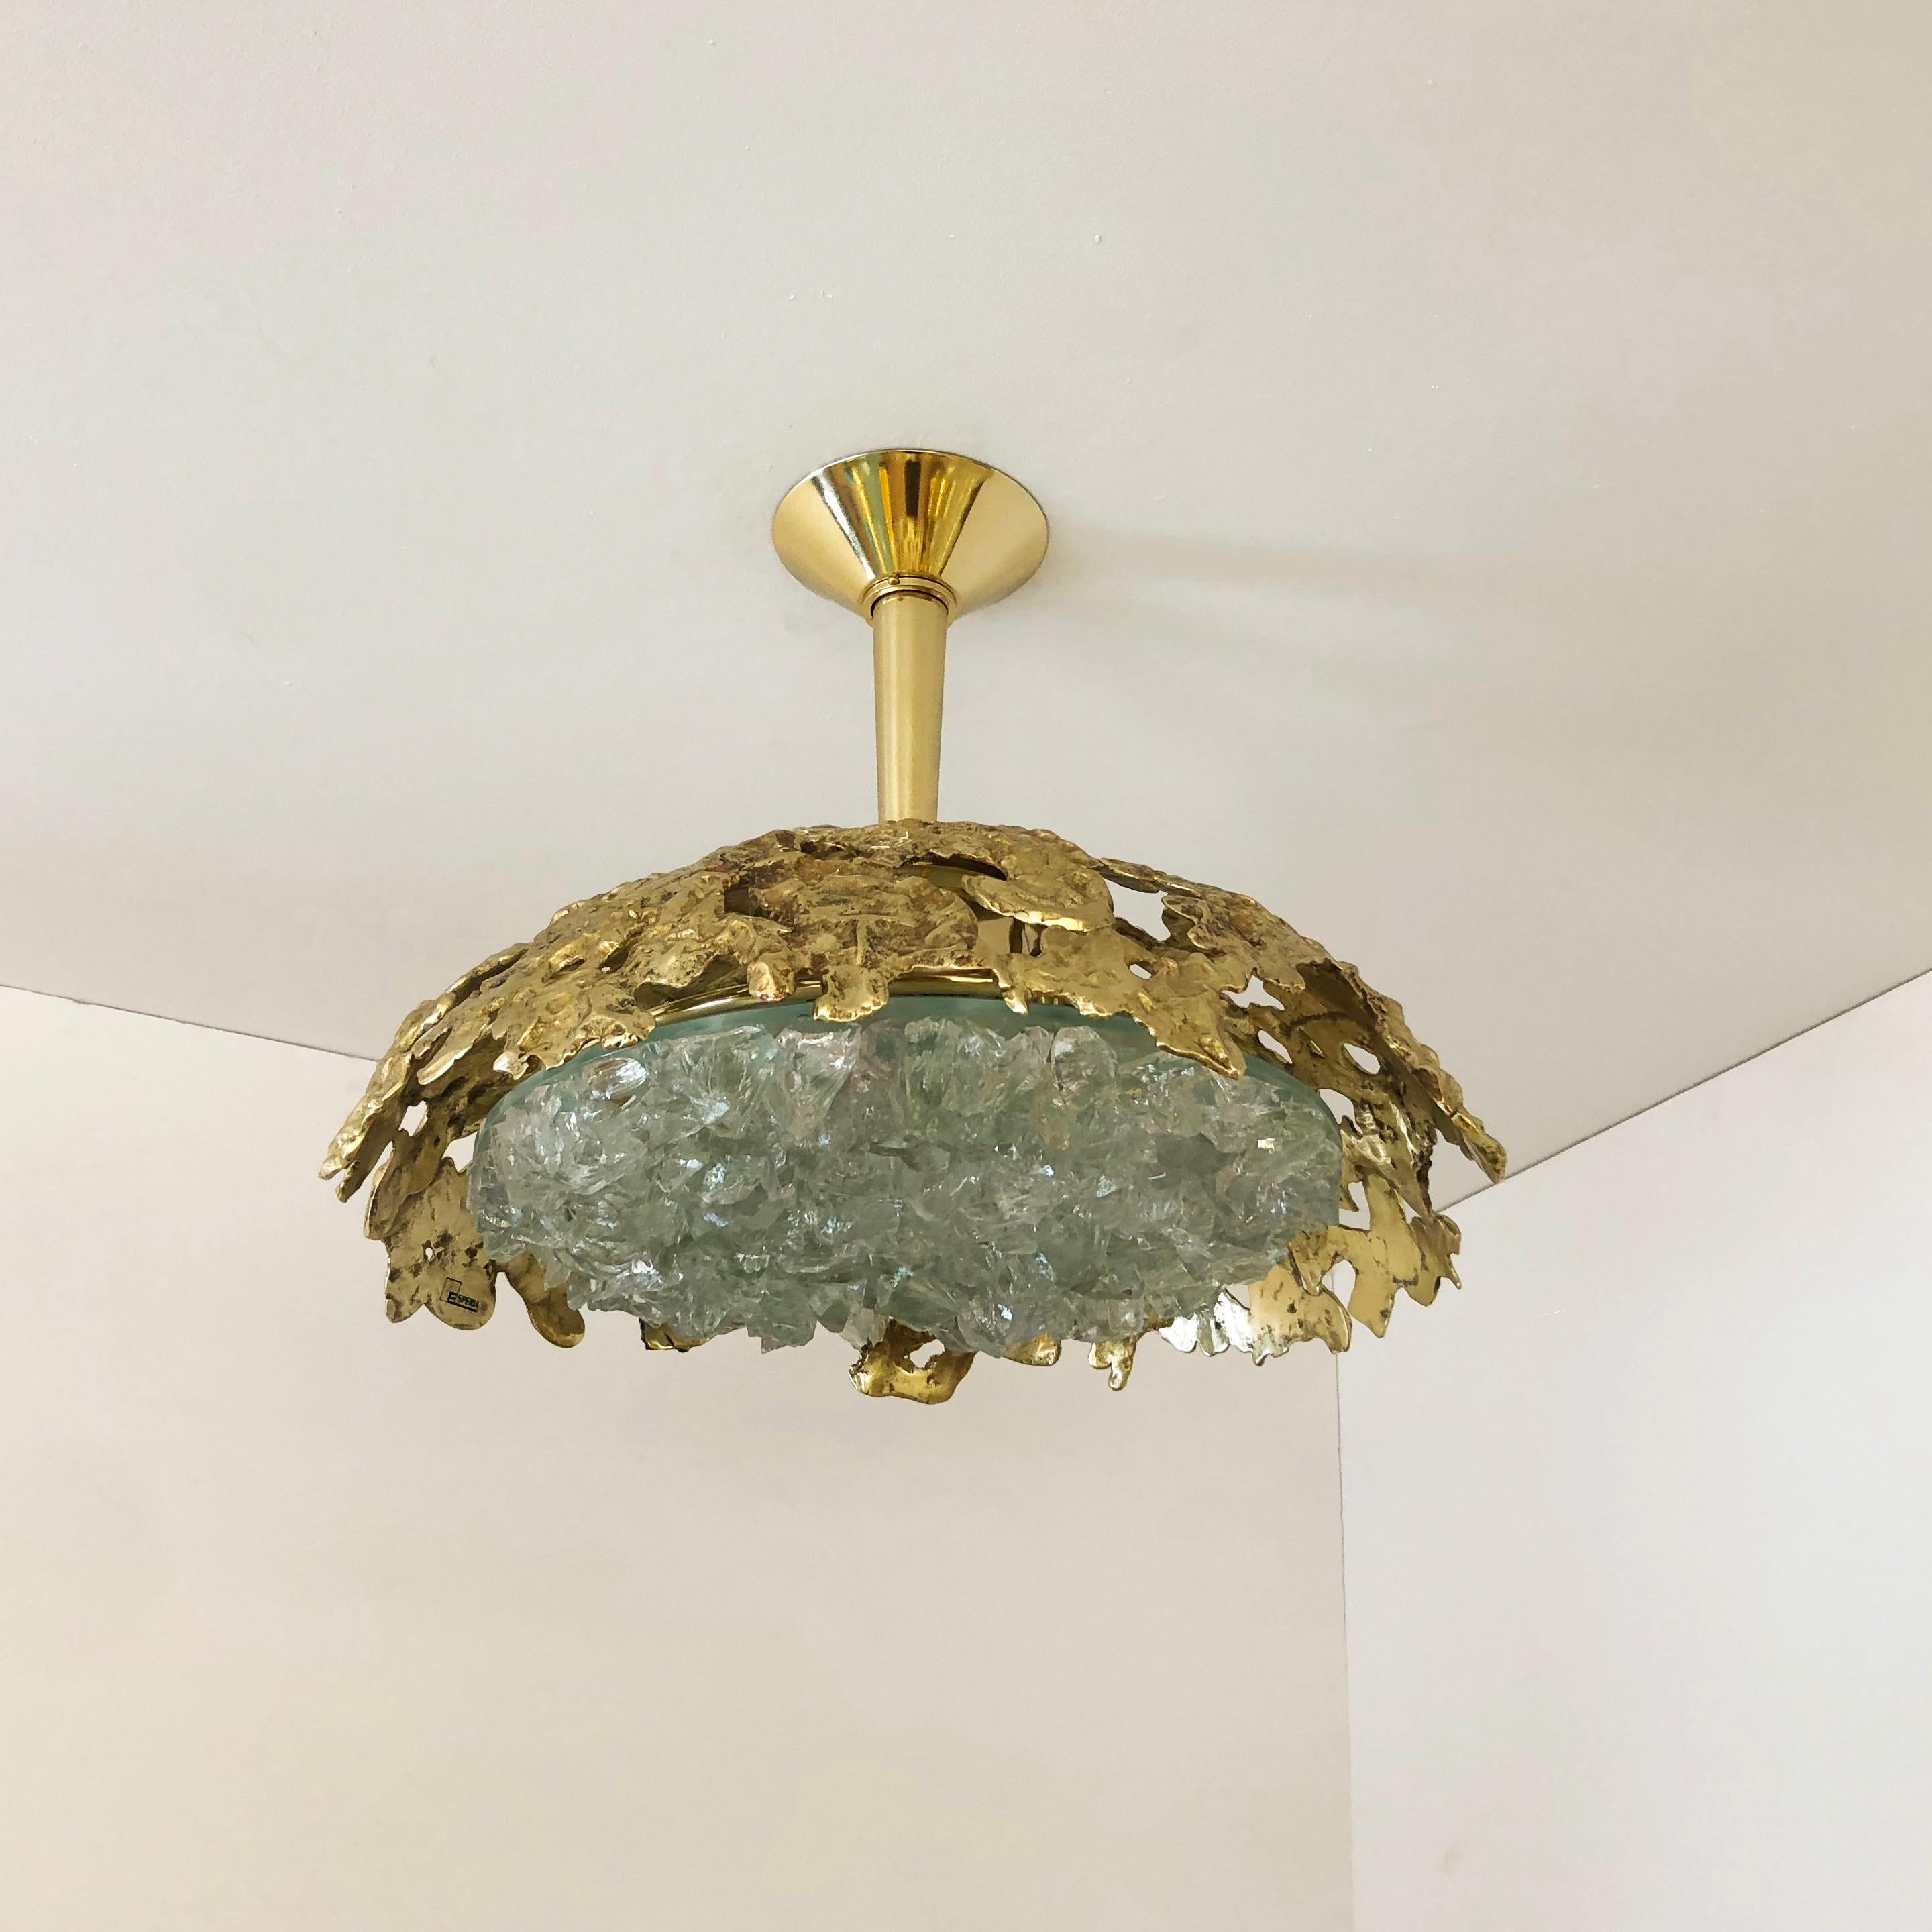 Blending sculpture and design, the N.21 is the largest fixture of the Etna series with an expansive glass shade composed of dozens of crystal elements. The organic cast brass shell culminates in a polished stem and canopy. Shown in polished brass